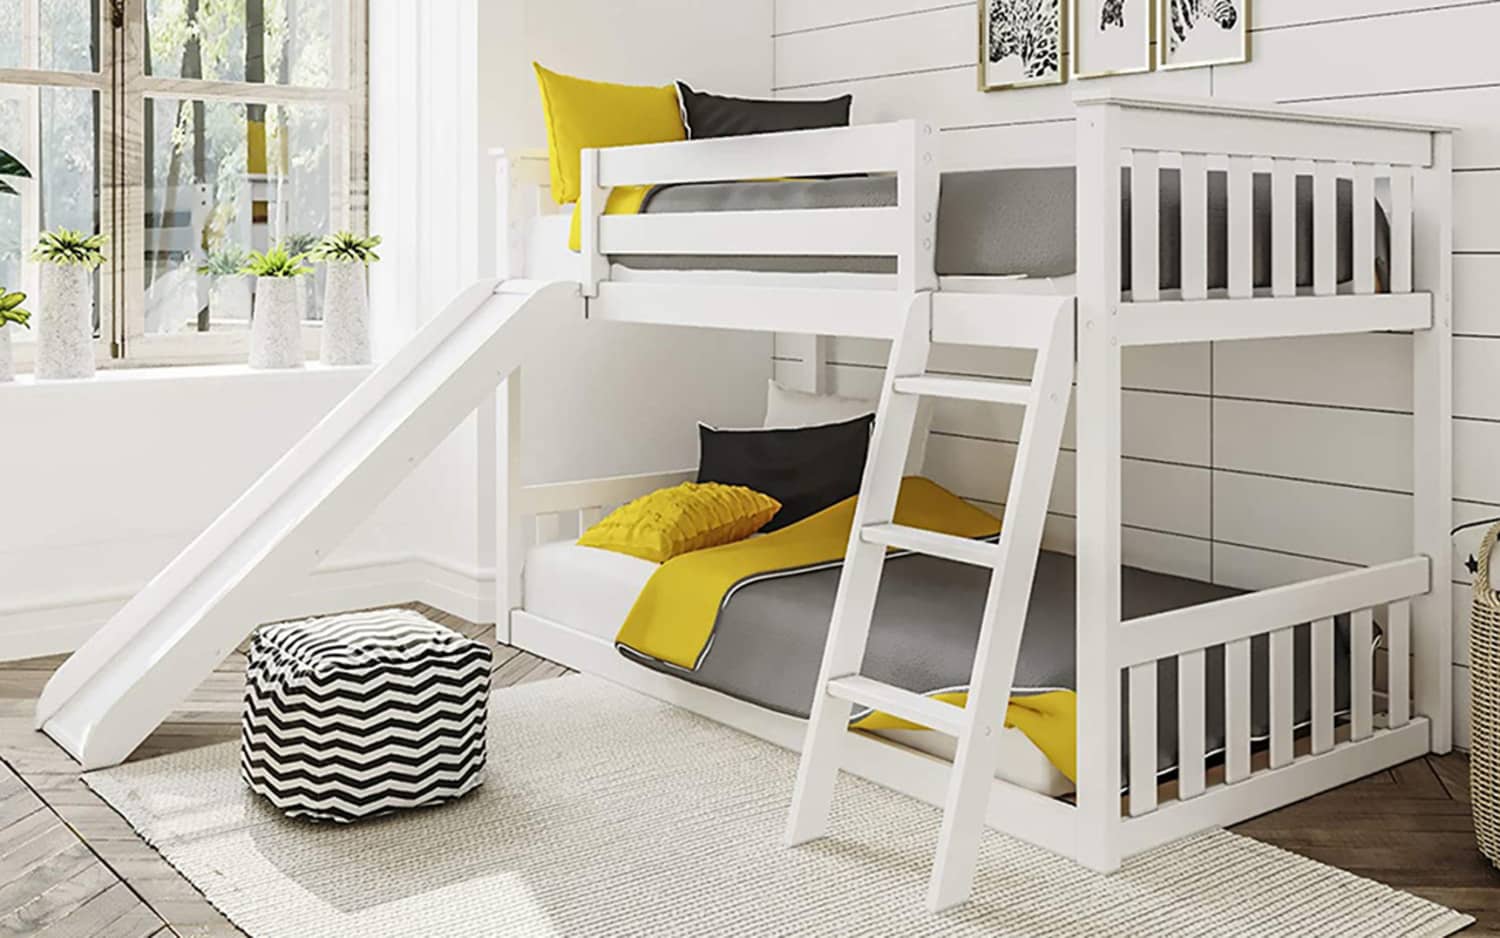 10 Kids’ Beds with Slides, Because an Indoor Slide is Every Kid’s Dream